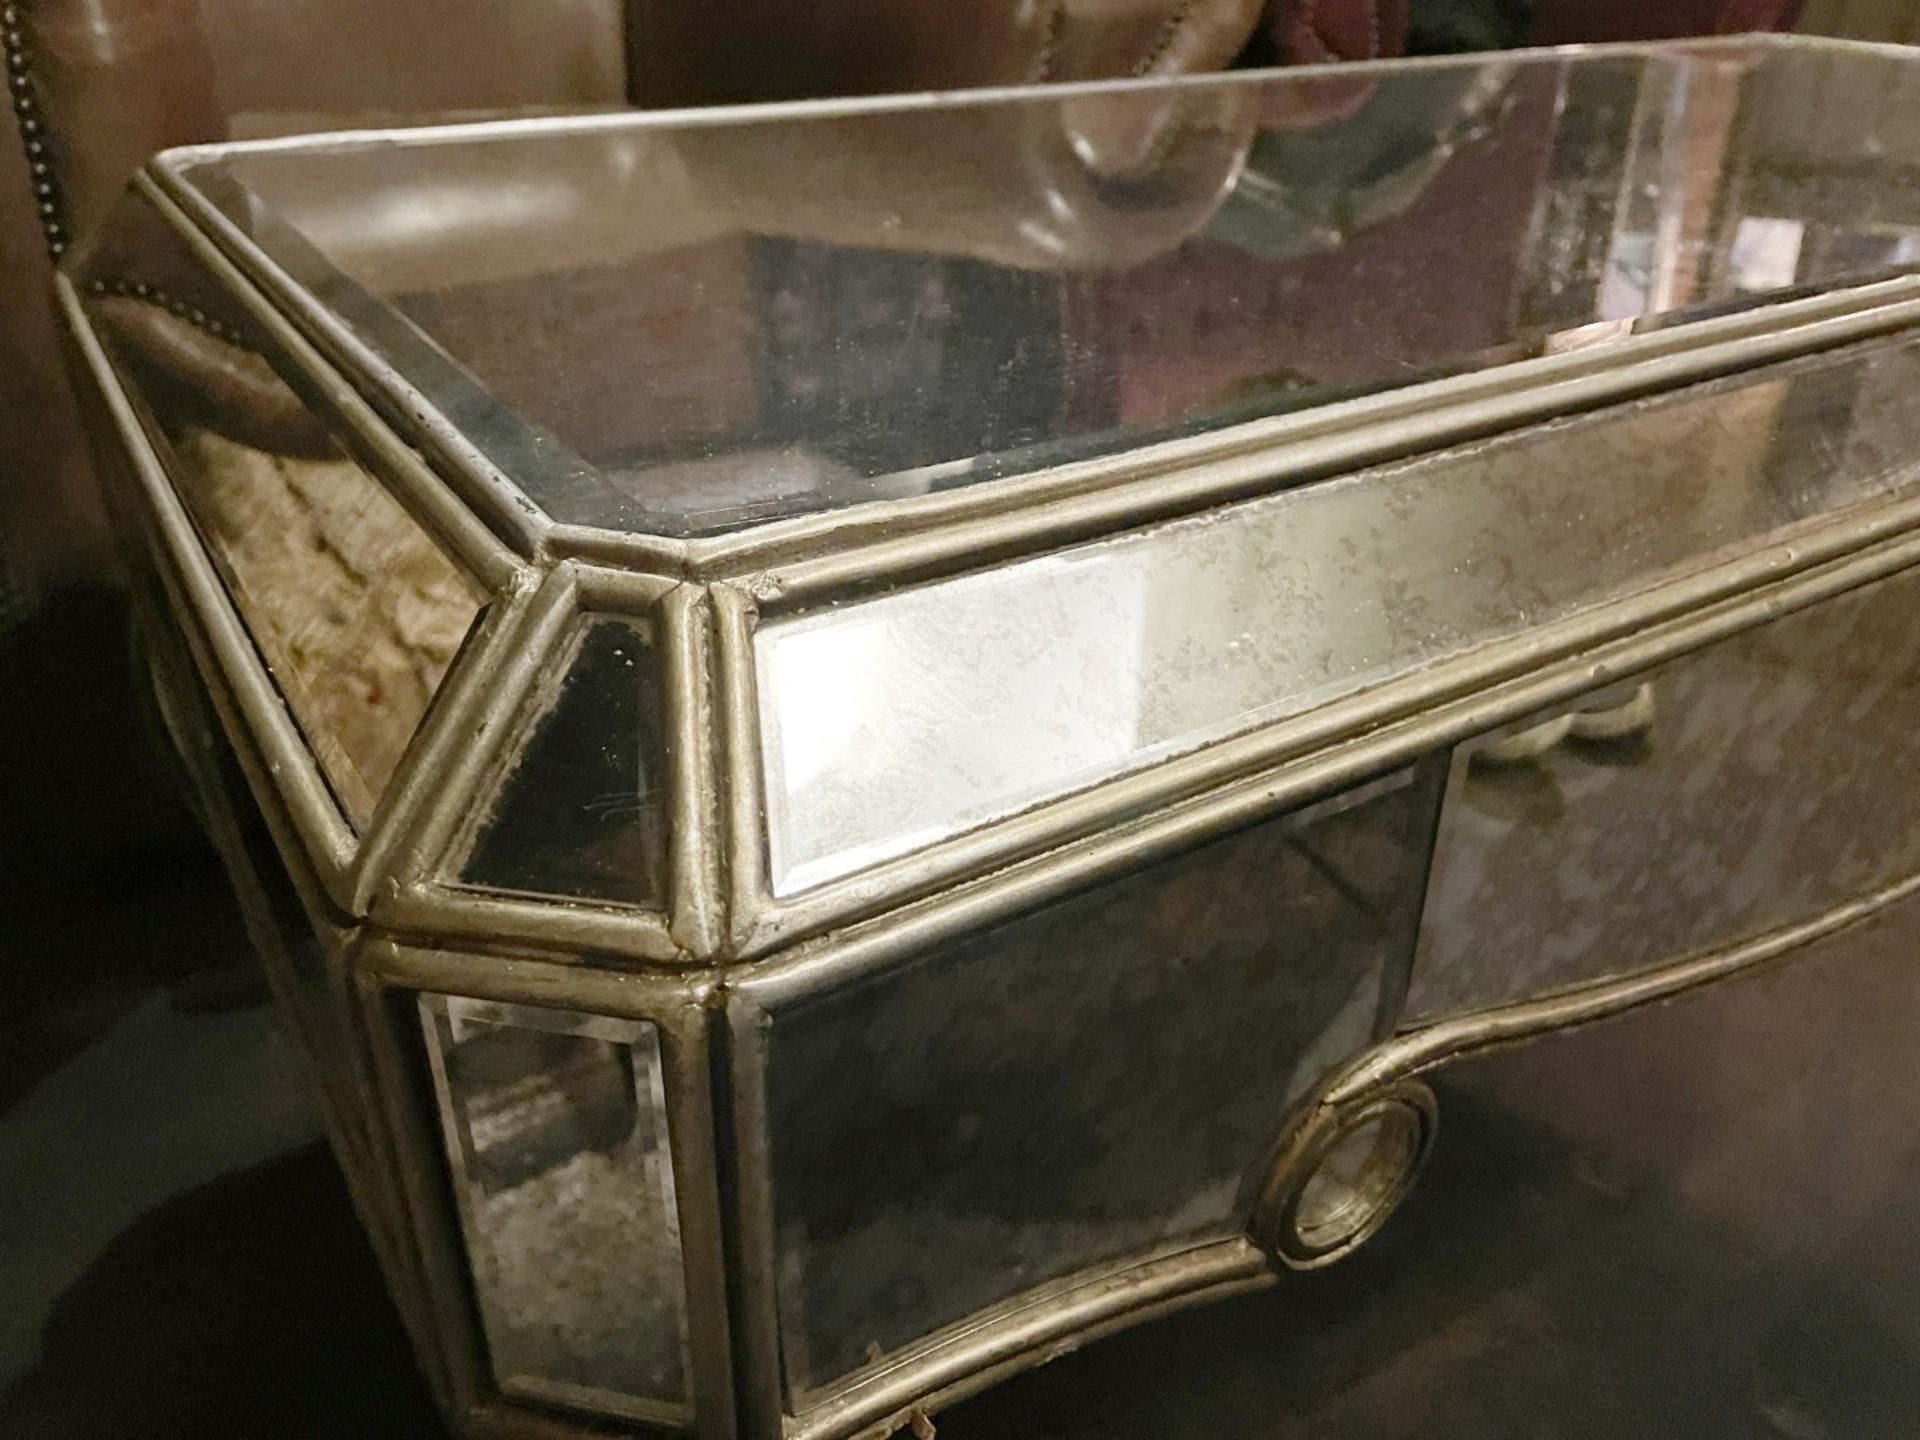 1 x Vintage French-style Mirrored Rectangular Cocktail Coffee Table with an Aged Aesthetic - Image 5 of 10